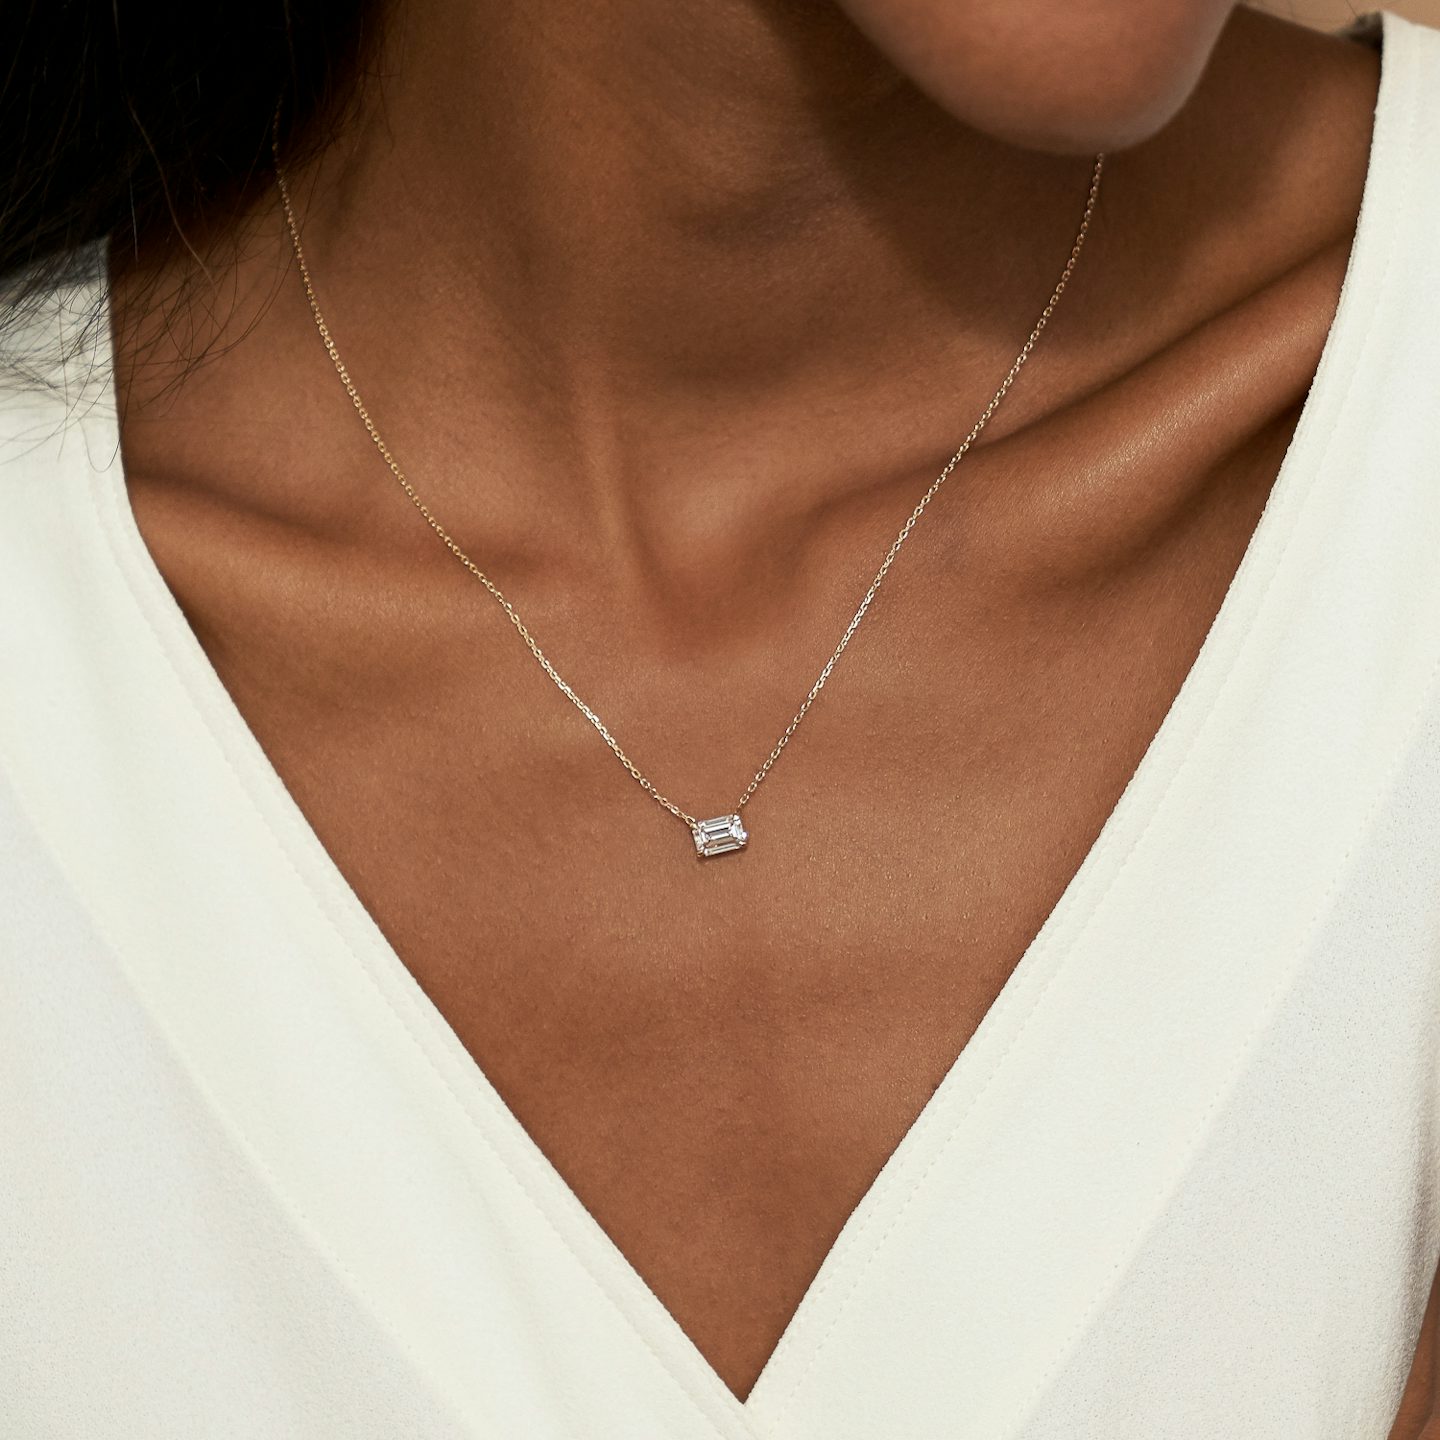 VRAI Solitaire Necklace | Emerald | 14k | 14k Rose Gold | Carat weight: 1